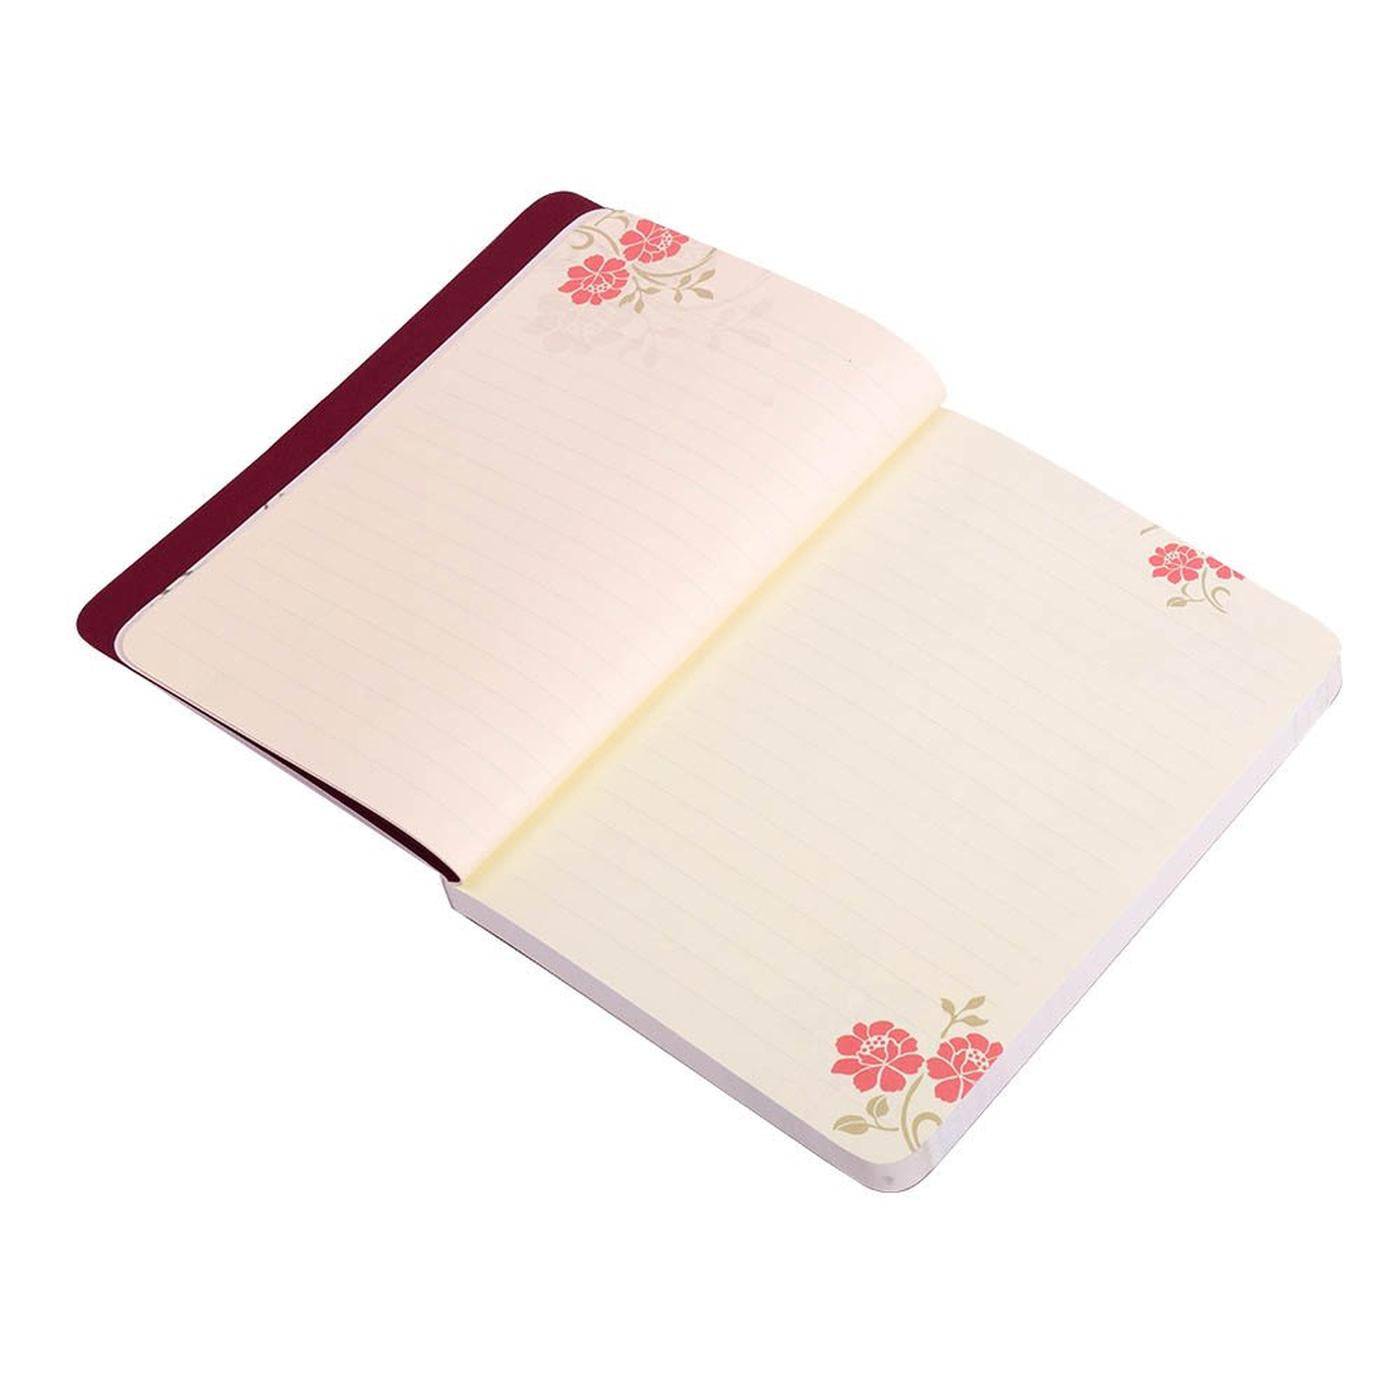 Initial G - Floral Monogram Notebook